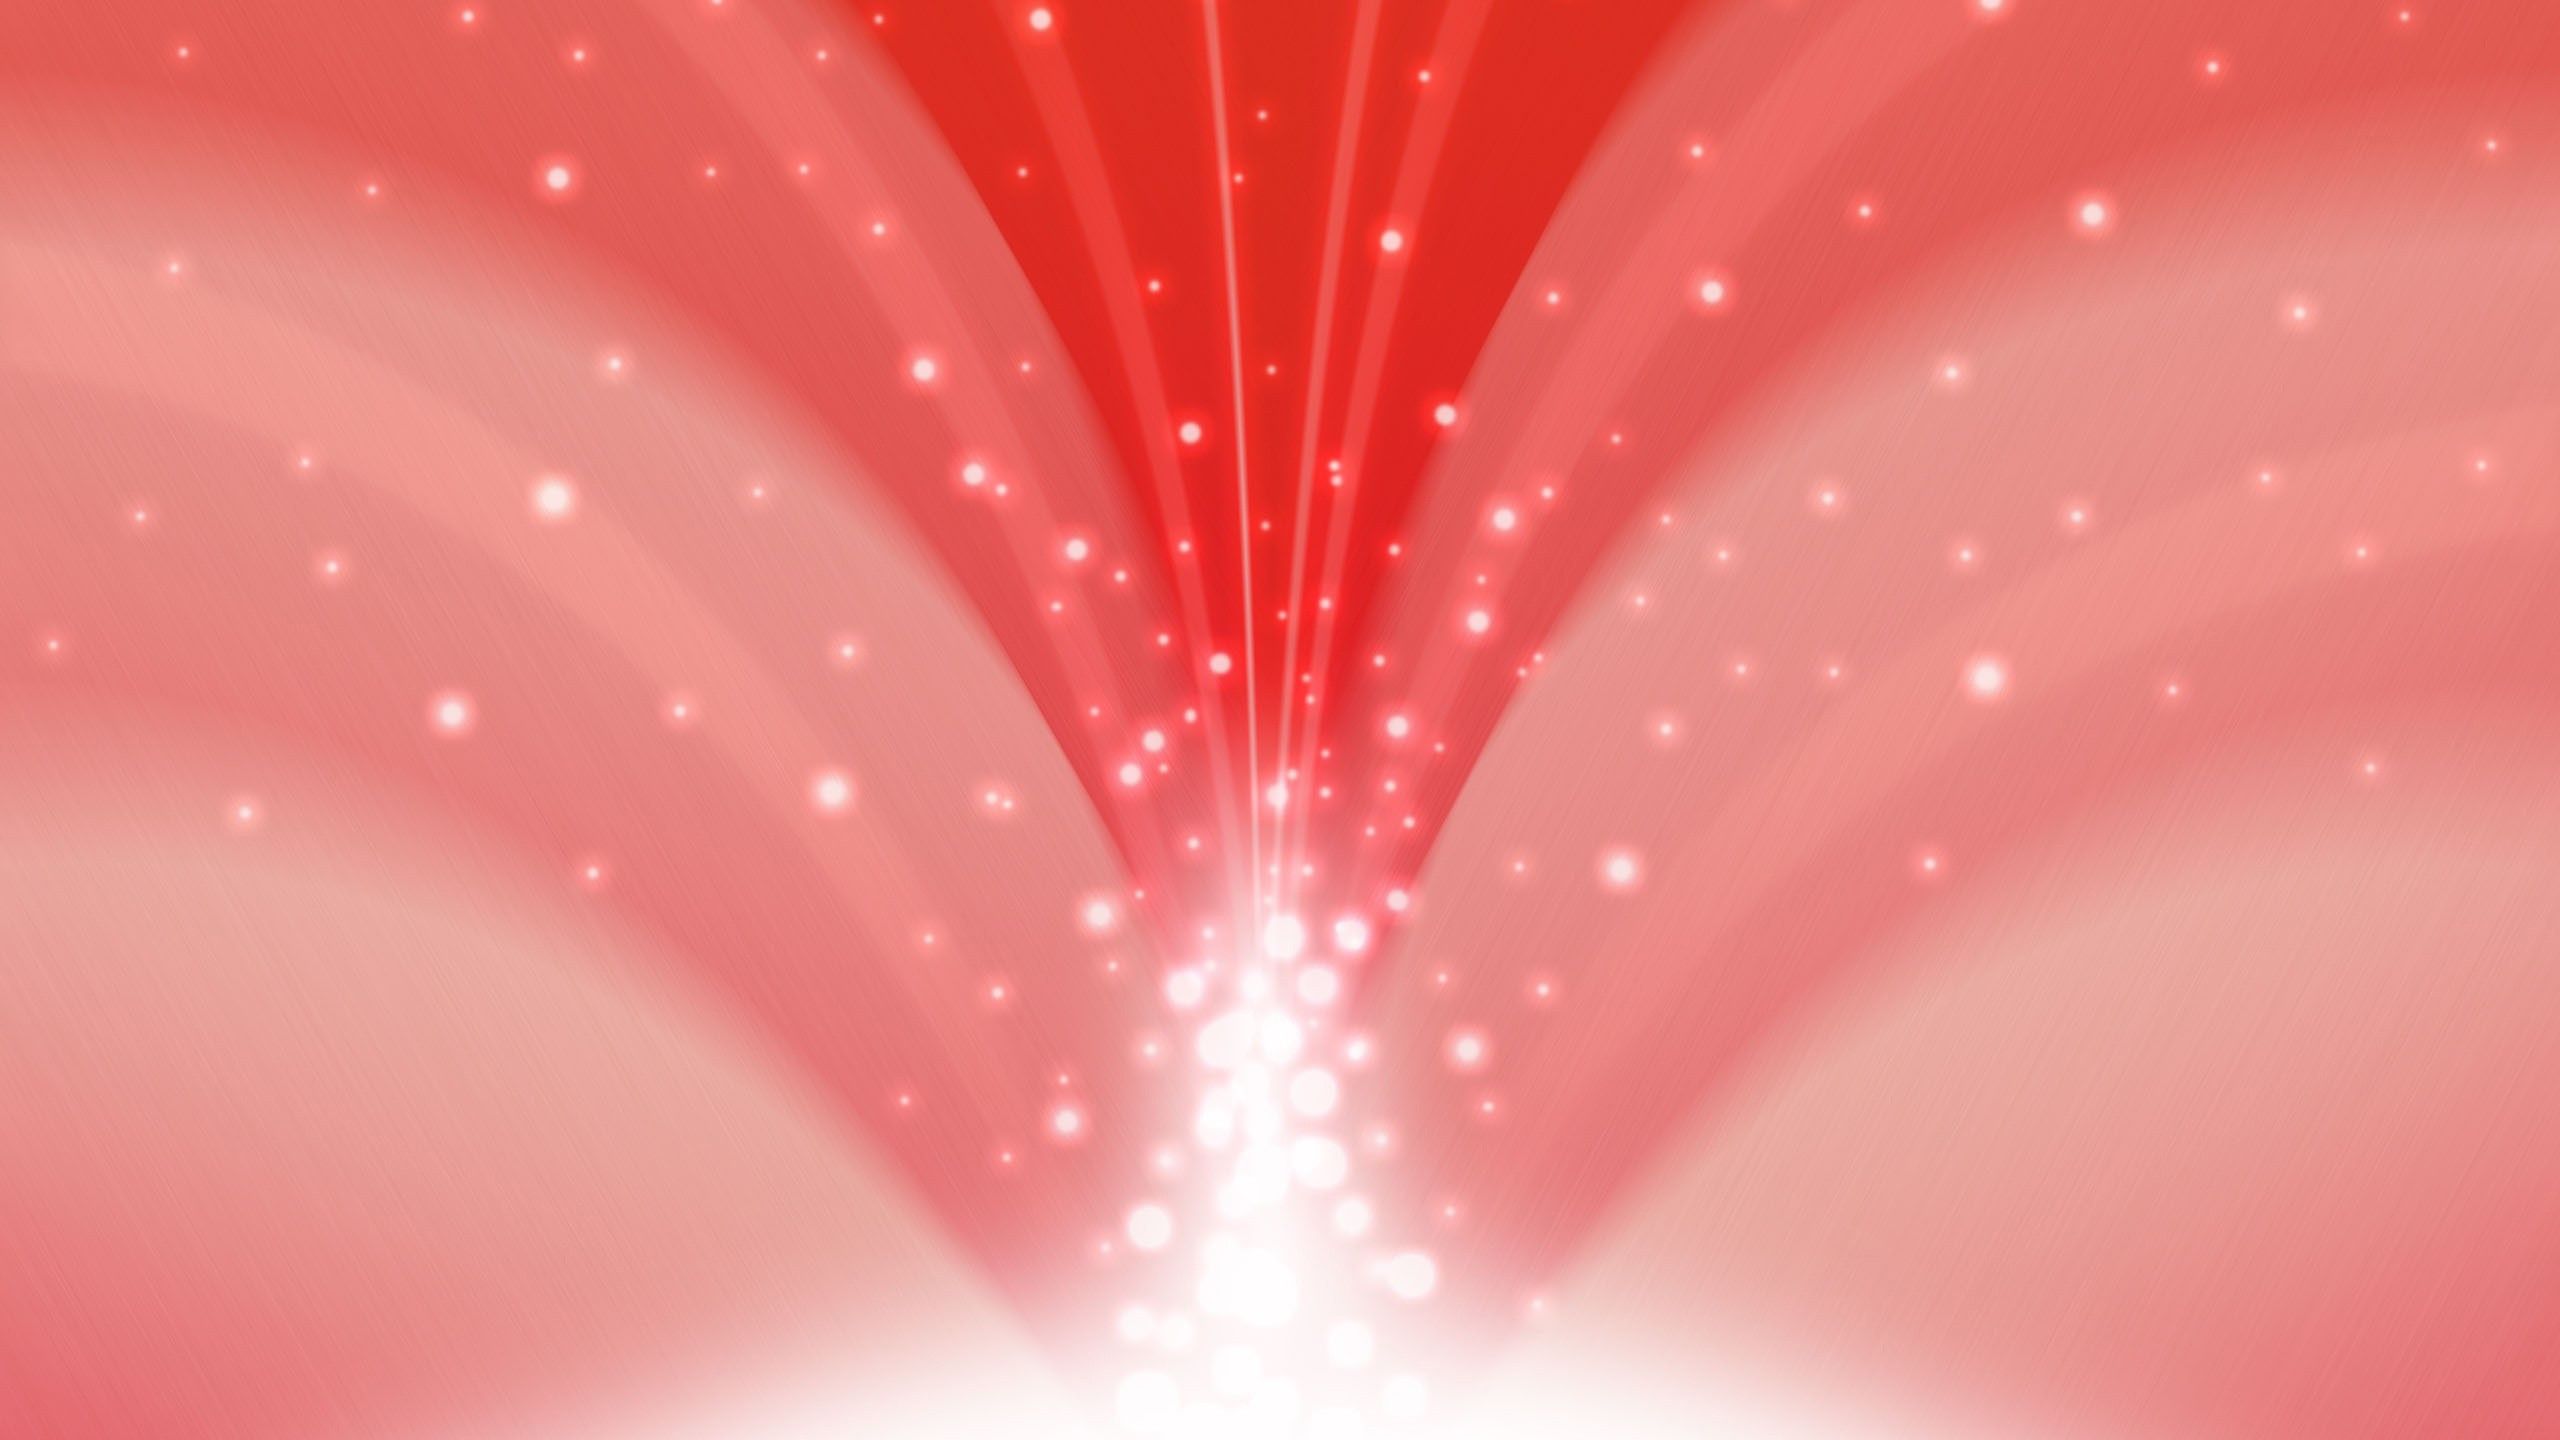 A red and white abstract background - Light red